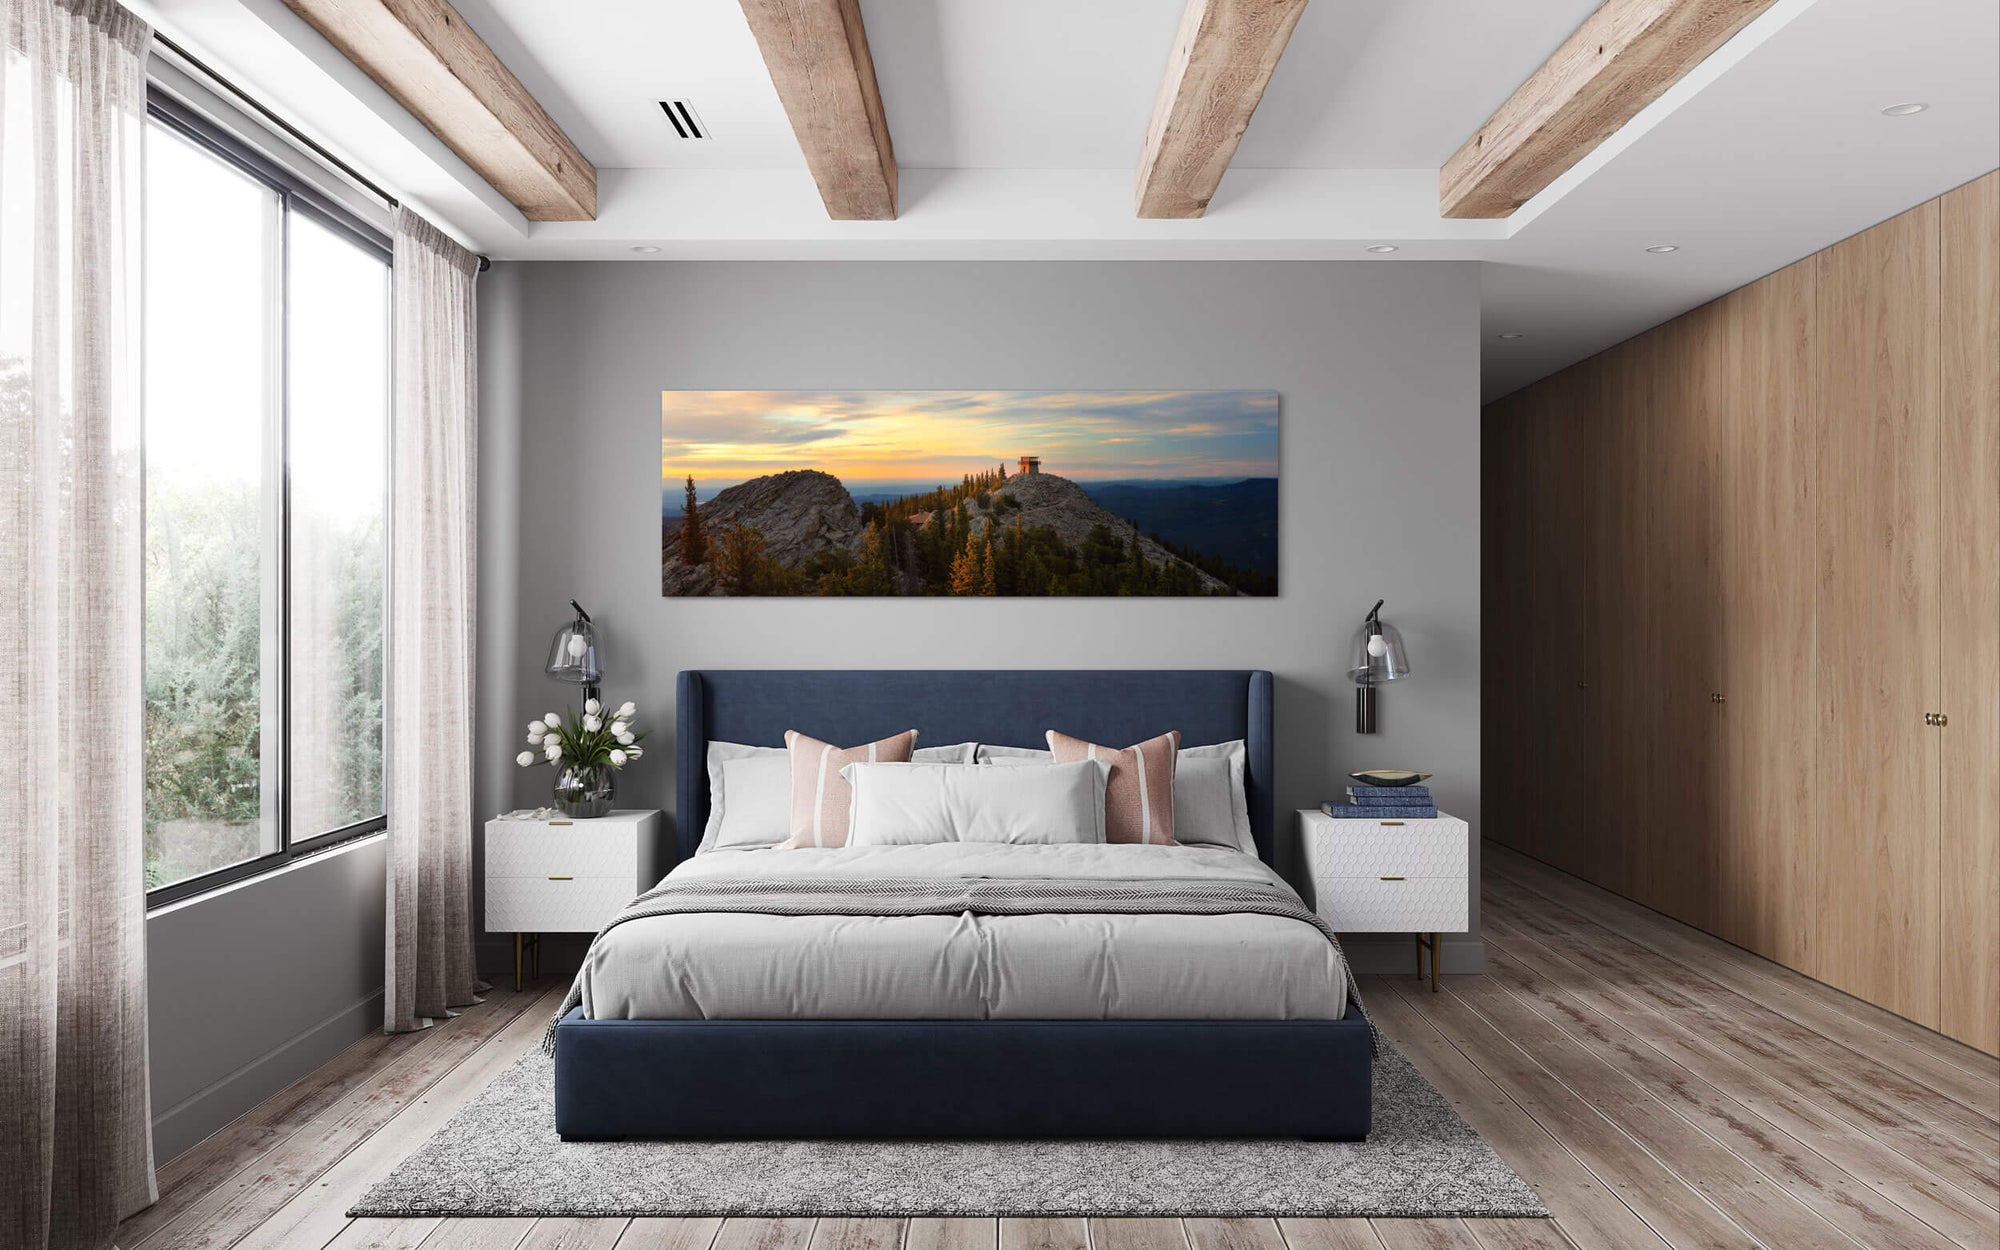 A piece of Denver art showing a fire lookout picture hangs in a bedroom.